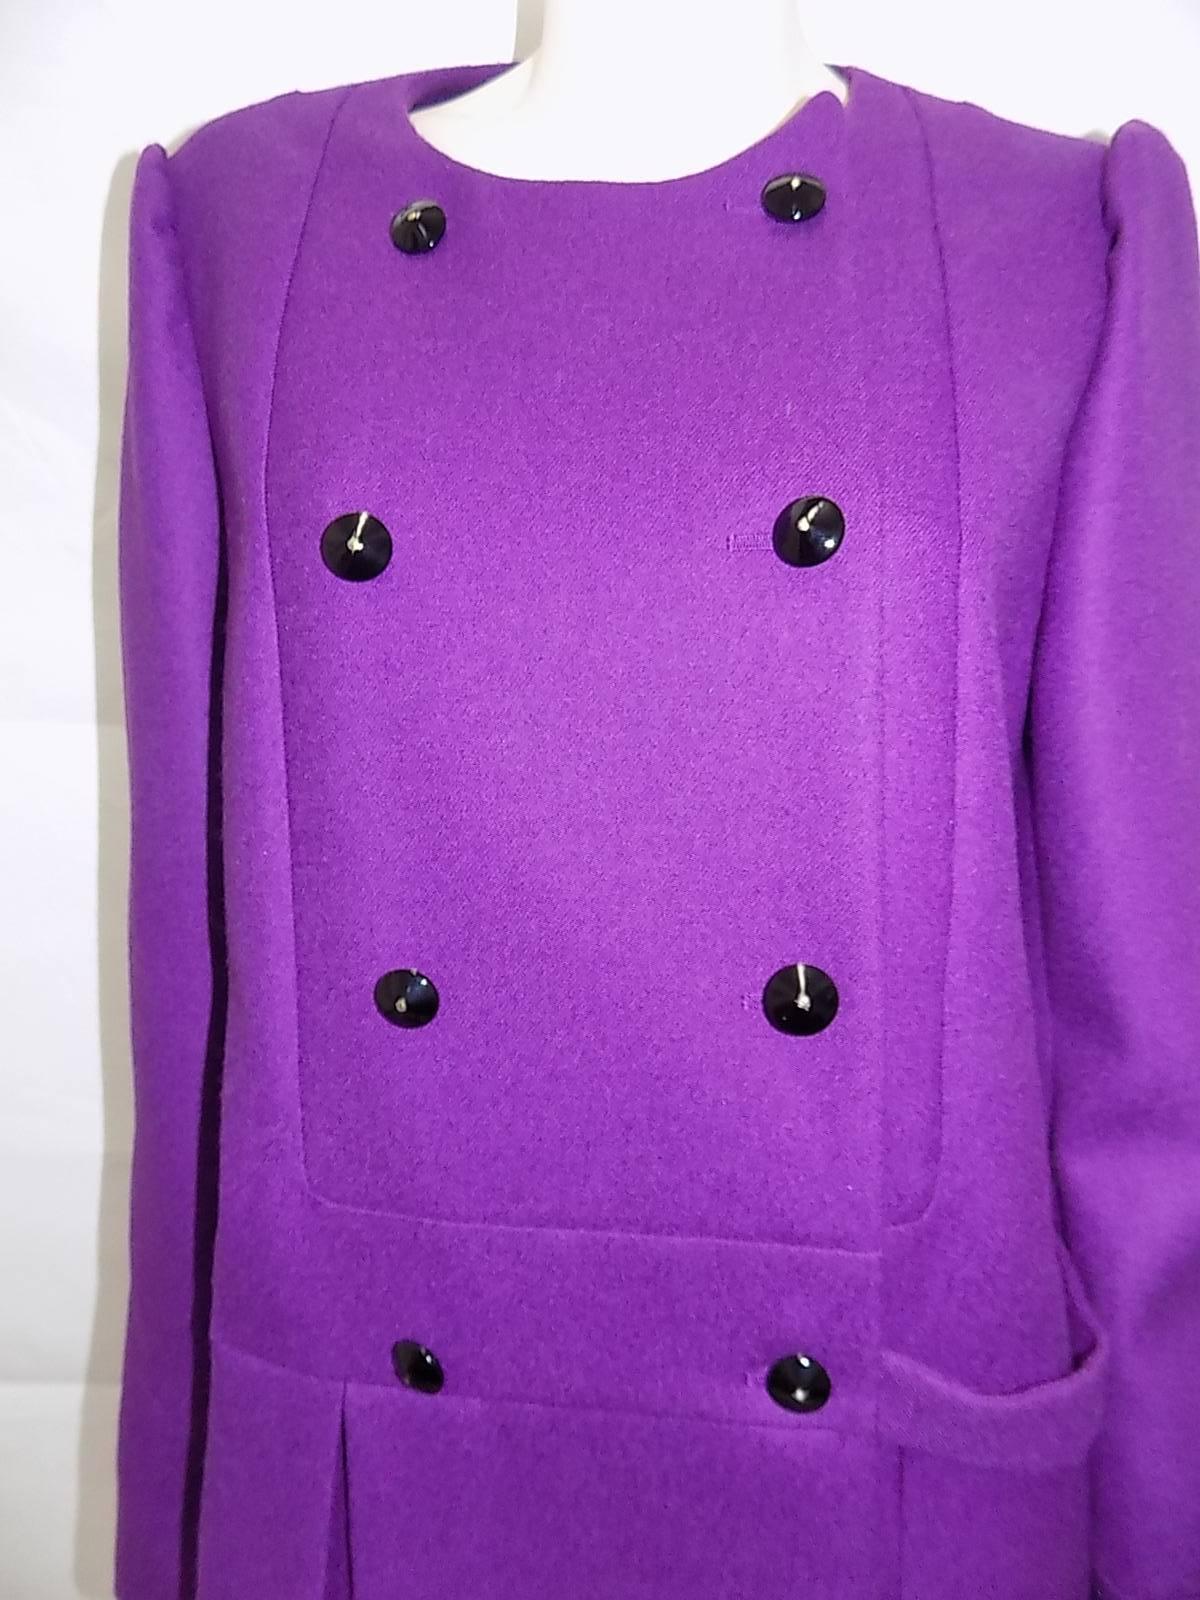 New With Tags Yves Saint Laurent Purple wool  Coat W Leather Buttons sz 46 1